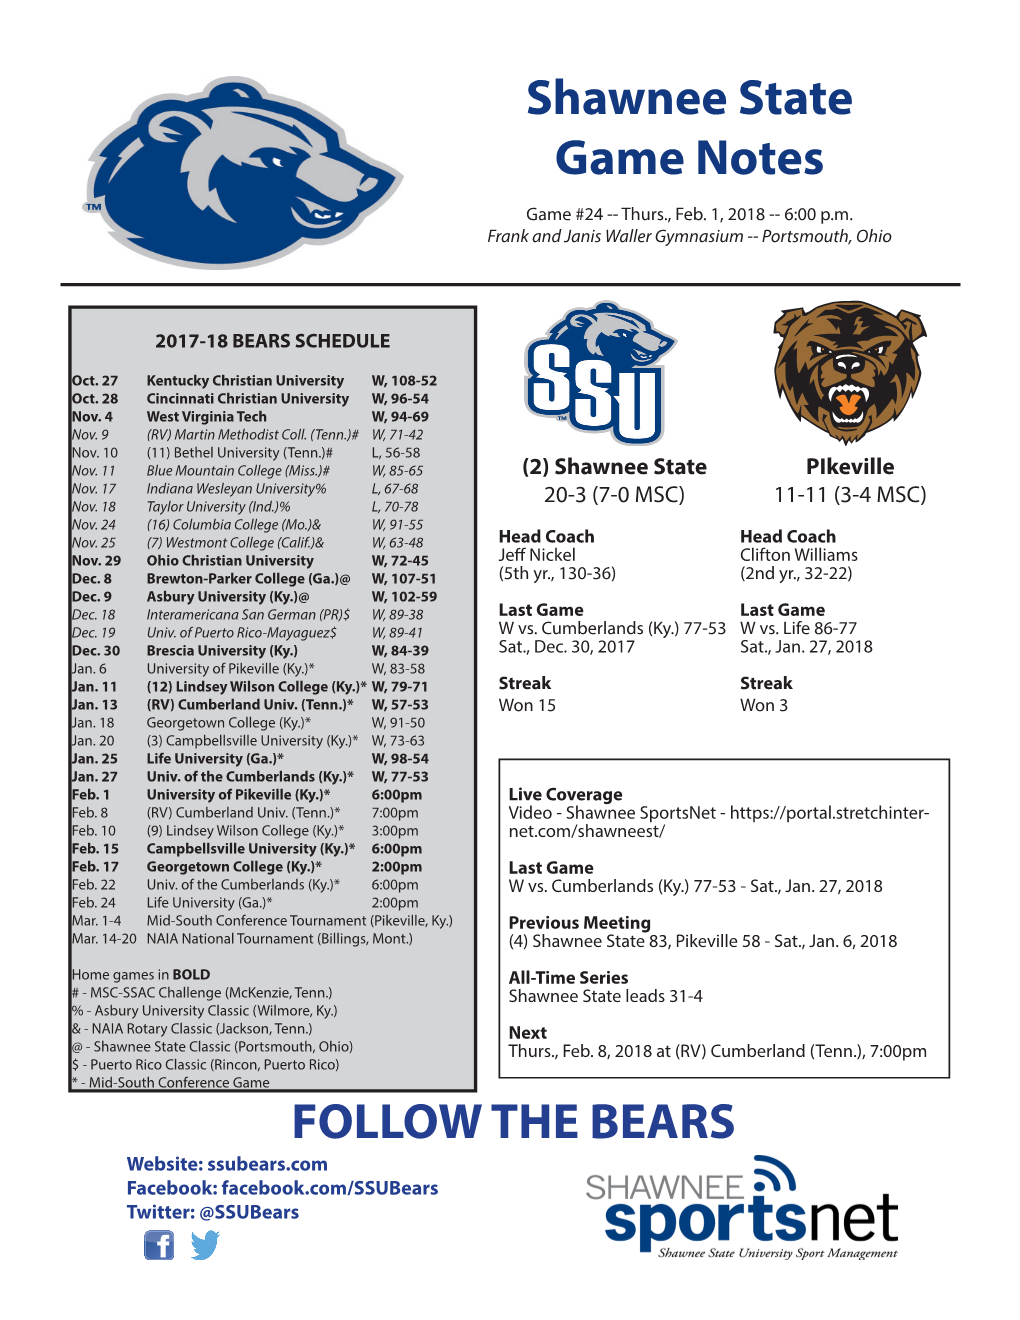 FOLLOW the BEARS Shawnee State Game Notes